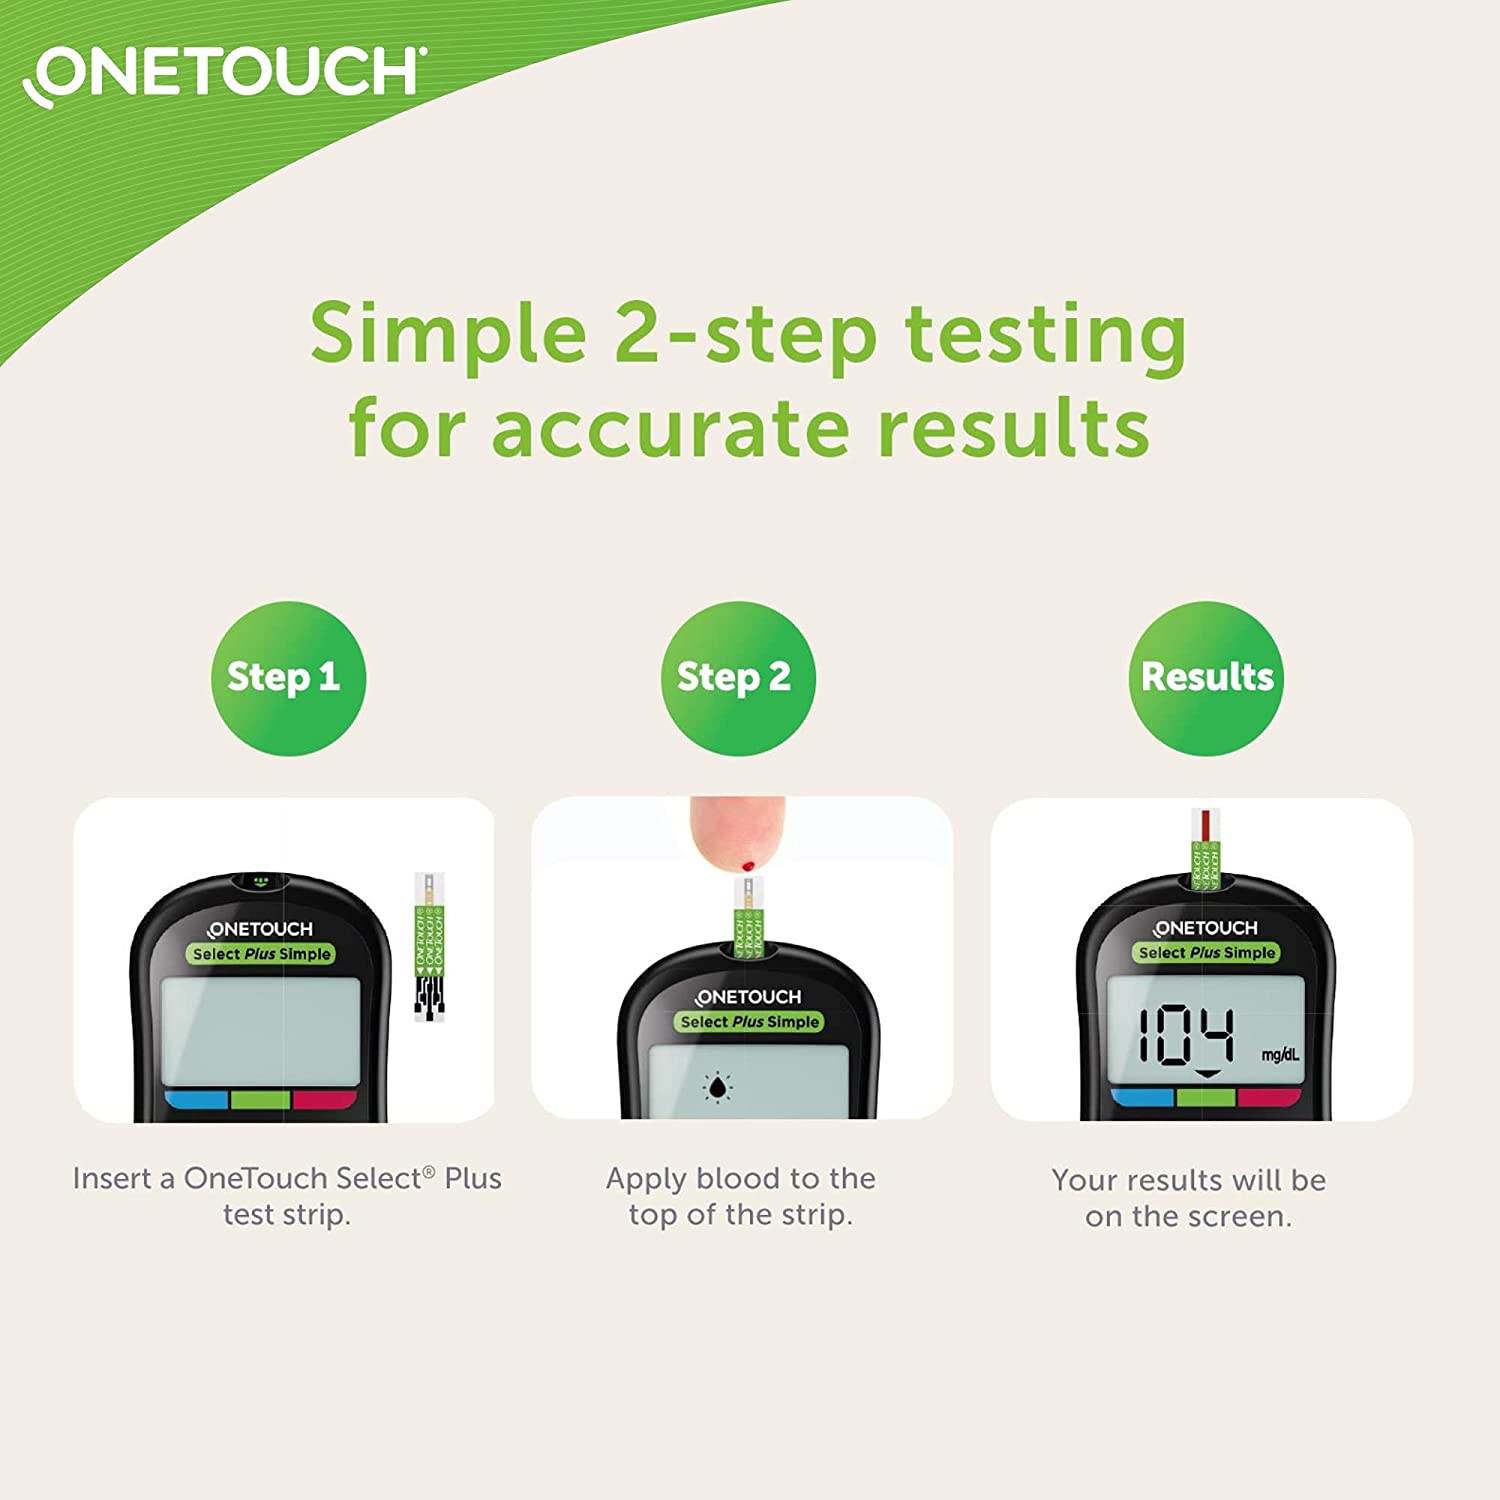 OneTouch Select Plus Simple glucometer machine | FREE 10 Test Strips +10 Sterile Lancets + 1 Lancing device | Simple & accurate testing of Blood sugar levels at home | Global Iconic Brand